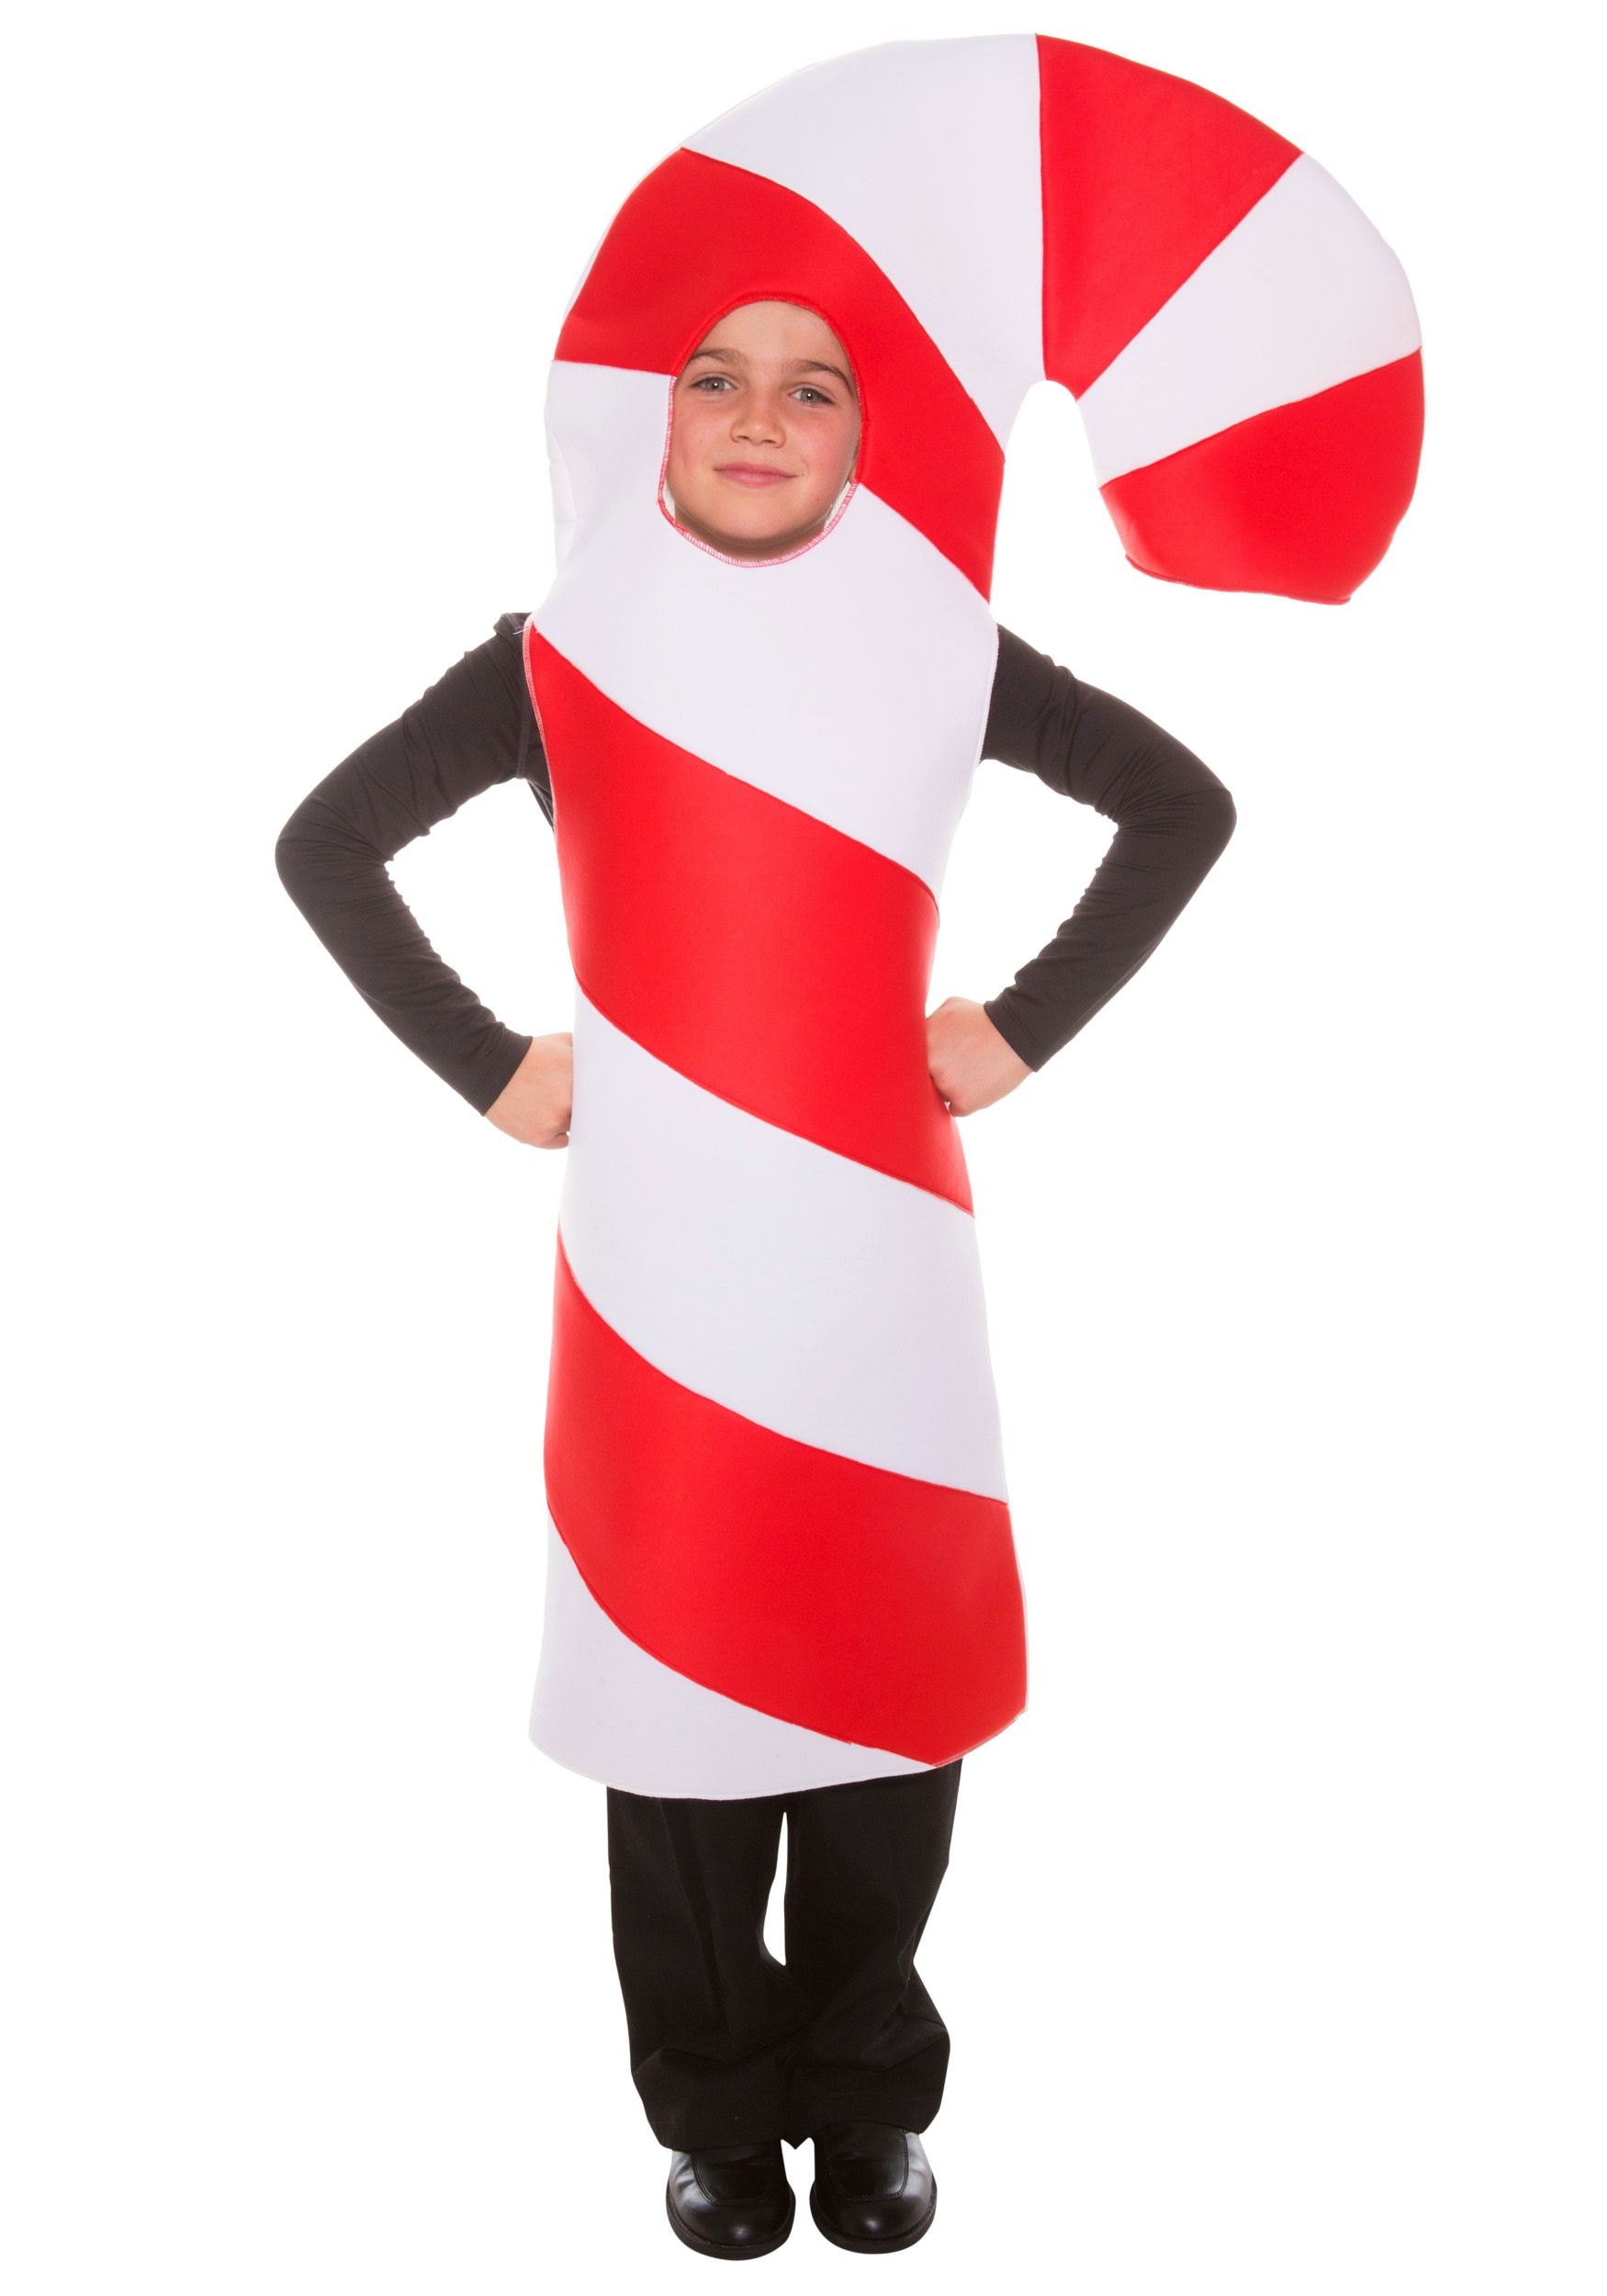 candy cane costumes